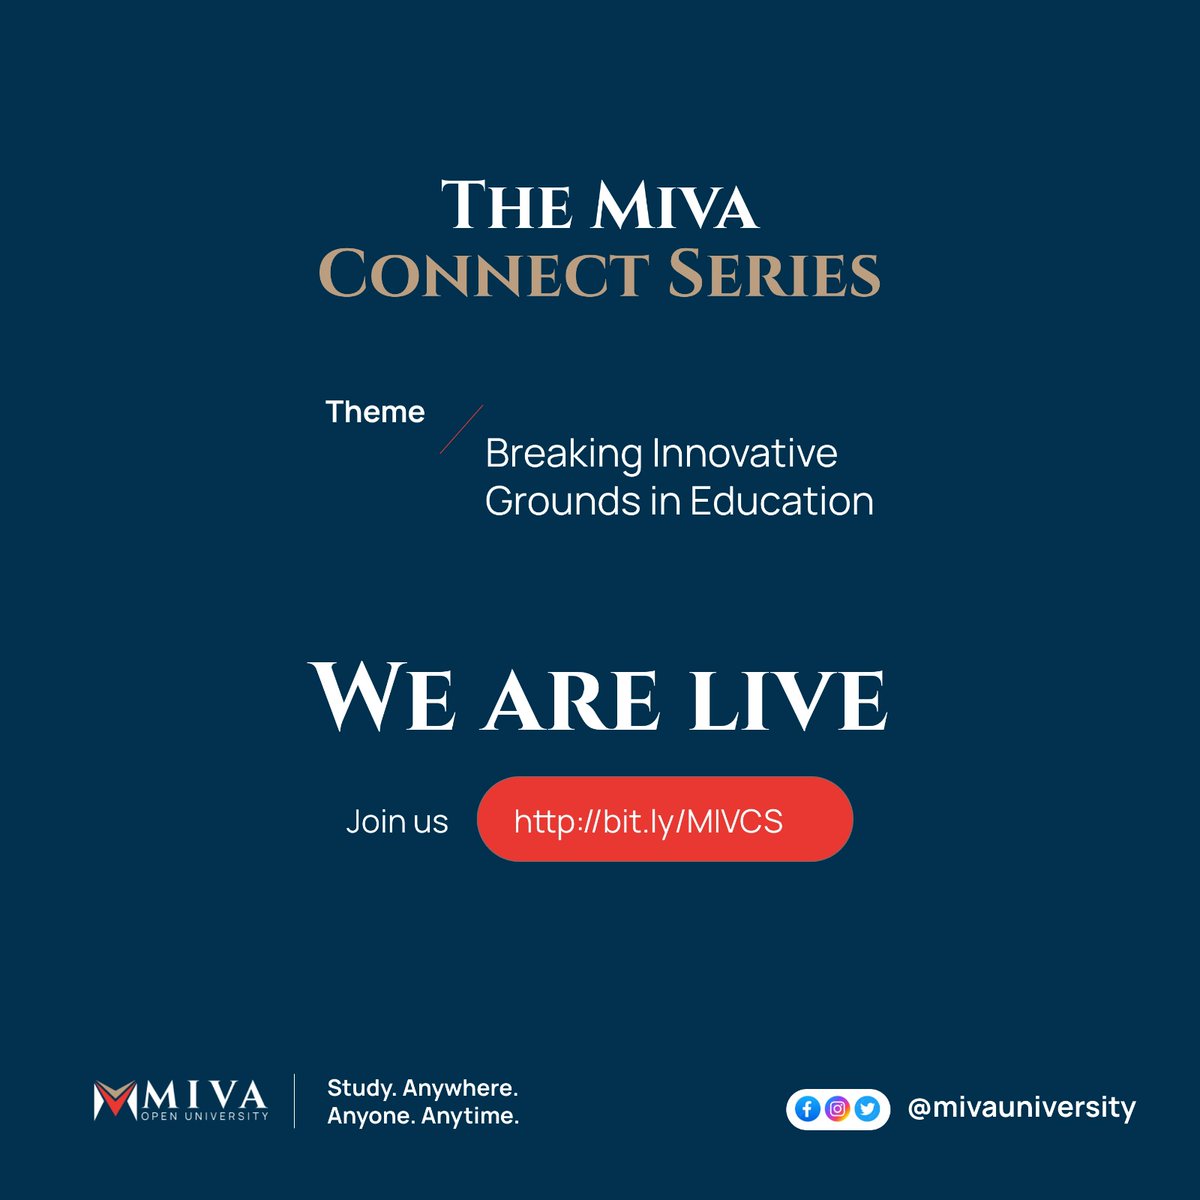 We are live!

Join us for the Miva Connect Series and get all the answers you need to start your transformative learning journey at Miva Open University.

Don't miss out!

Click here bit.ly/MIVCS, to join the conversation now.

#MivaConnectSeries  #EdTechChat